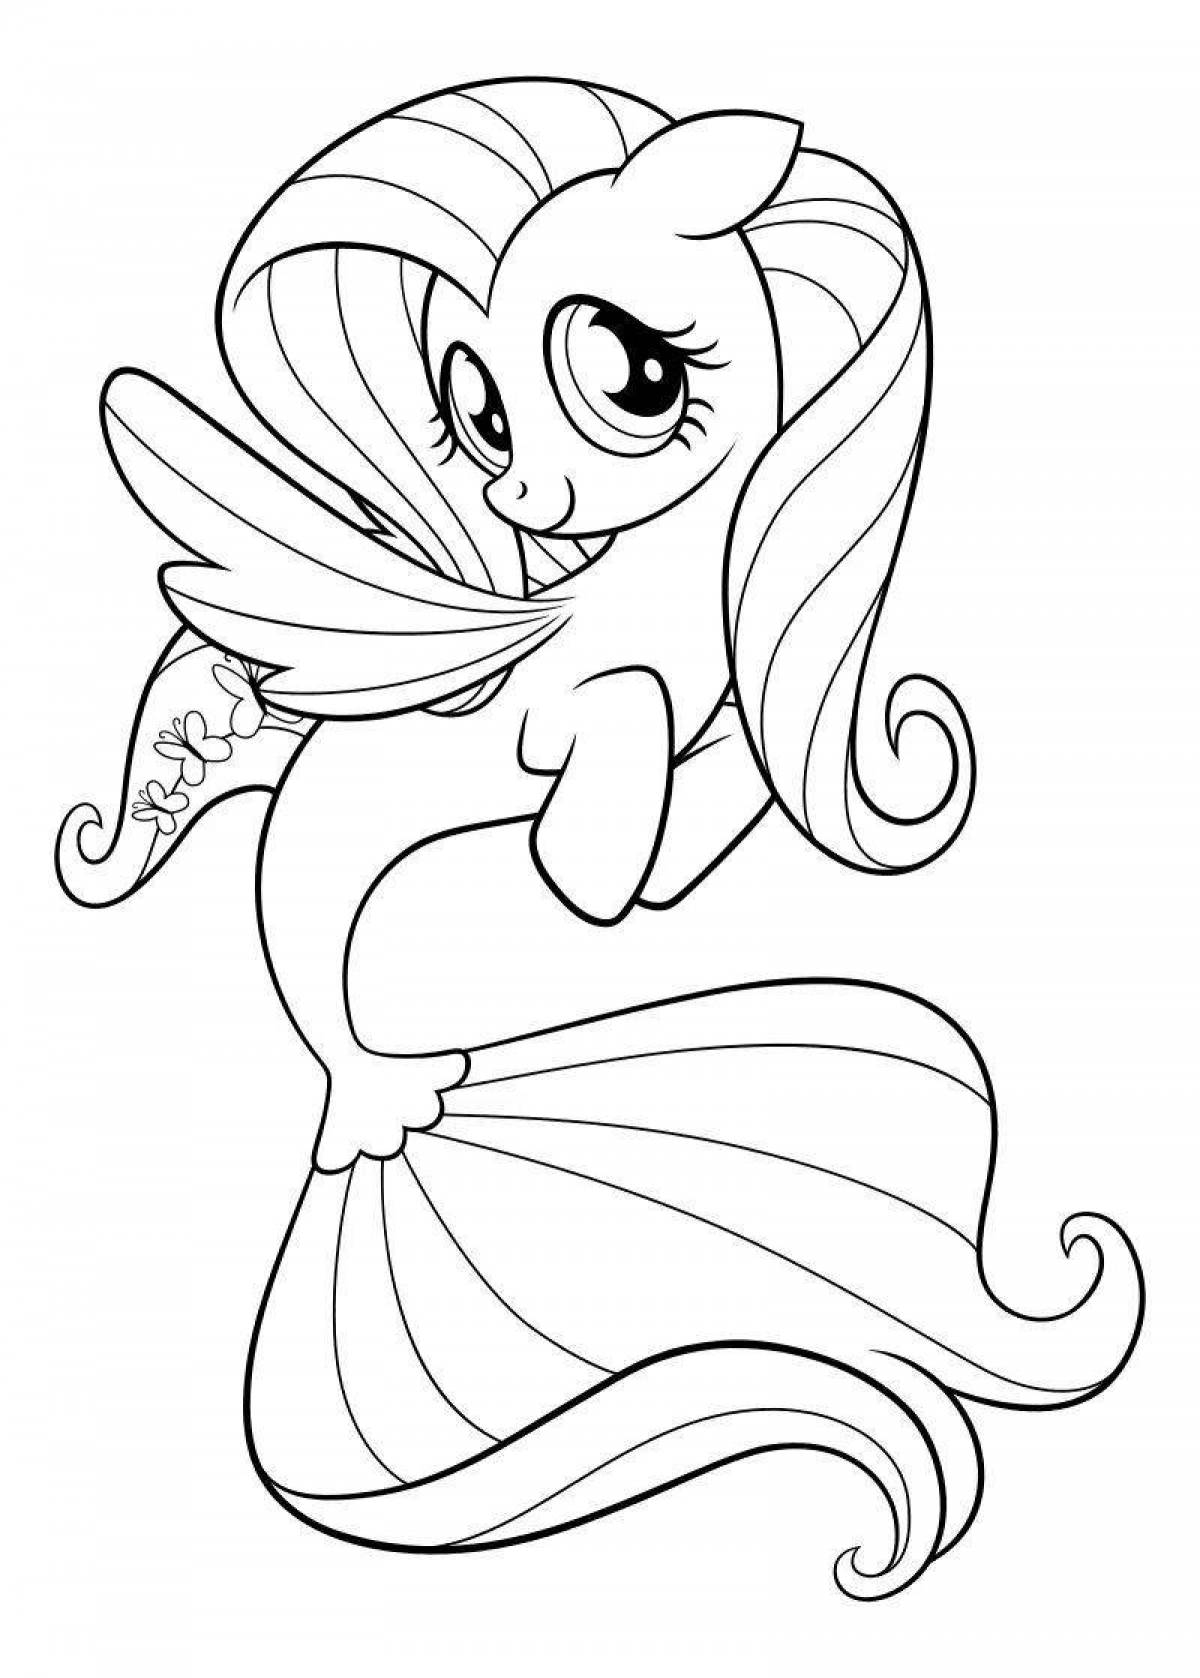 Great coloring my little pony mermaid